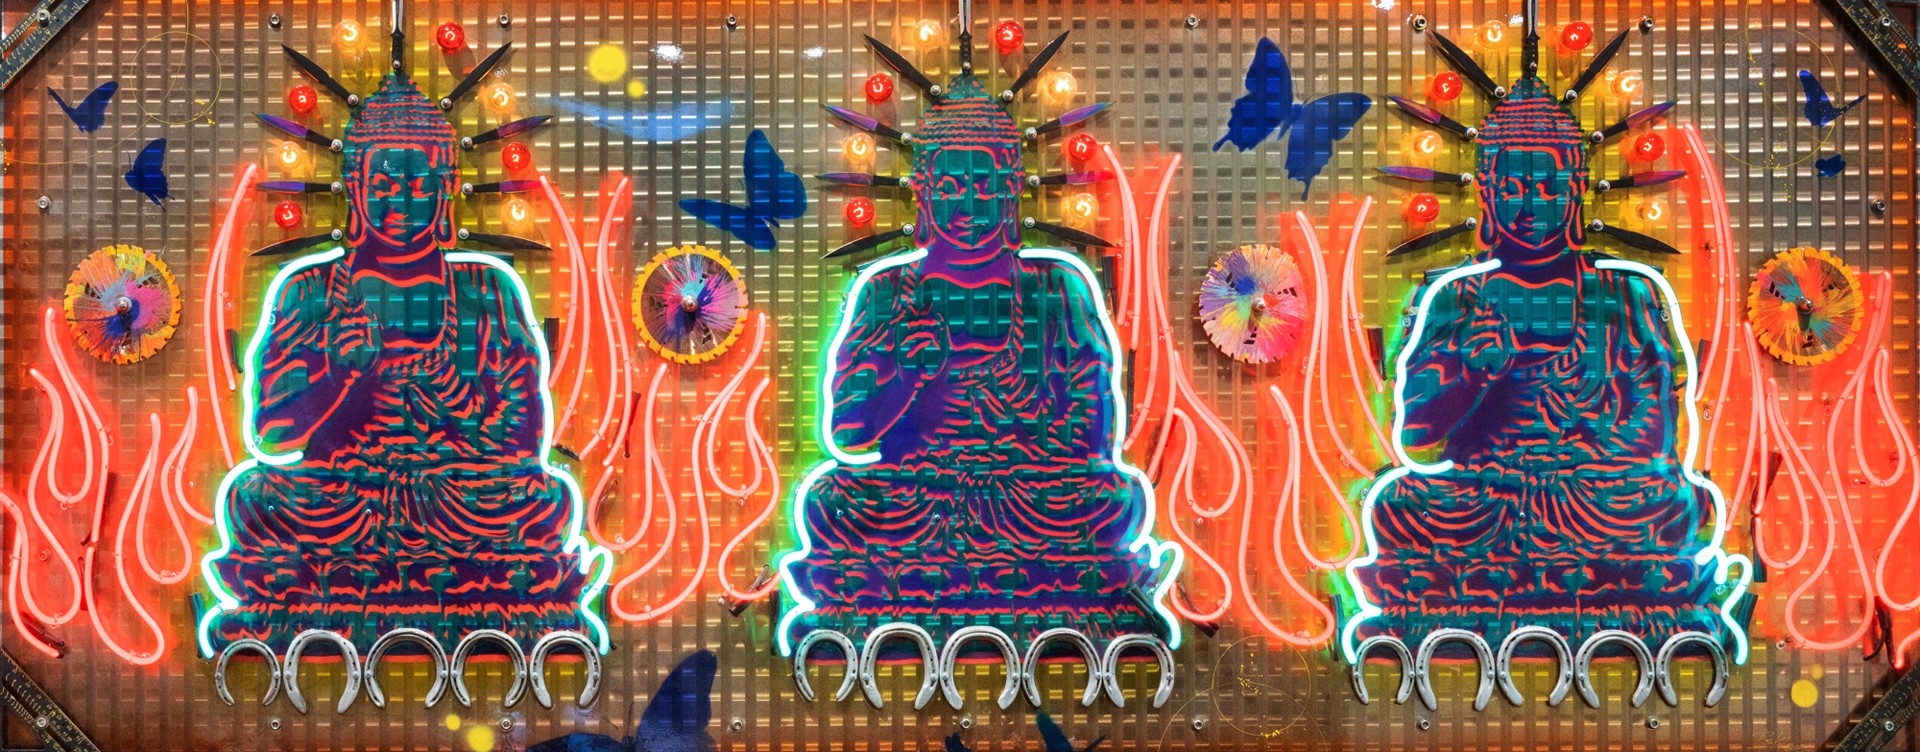 Peaceful Buddha with throwing knives Neon by Risk